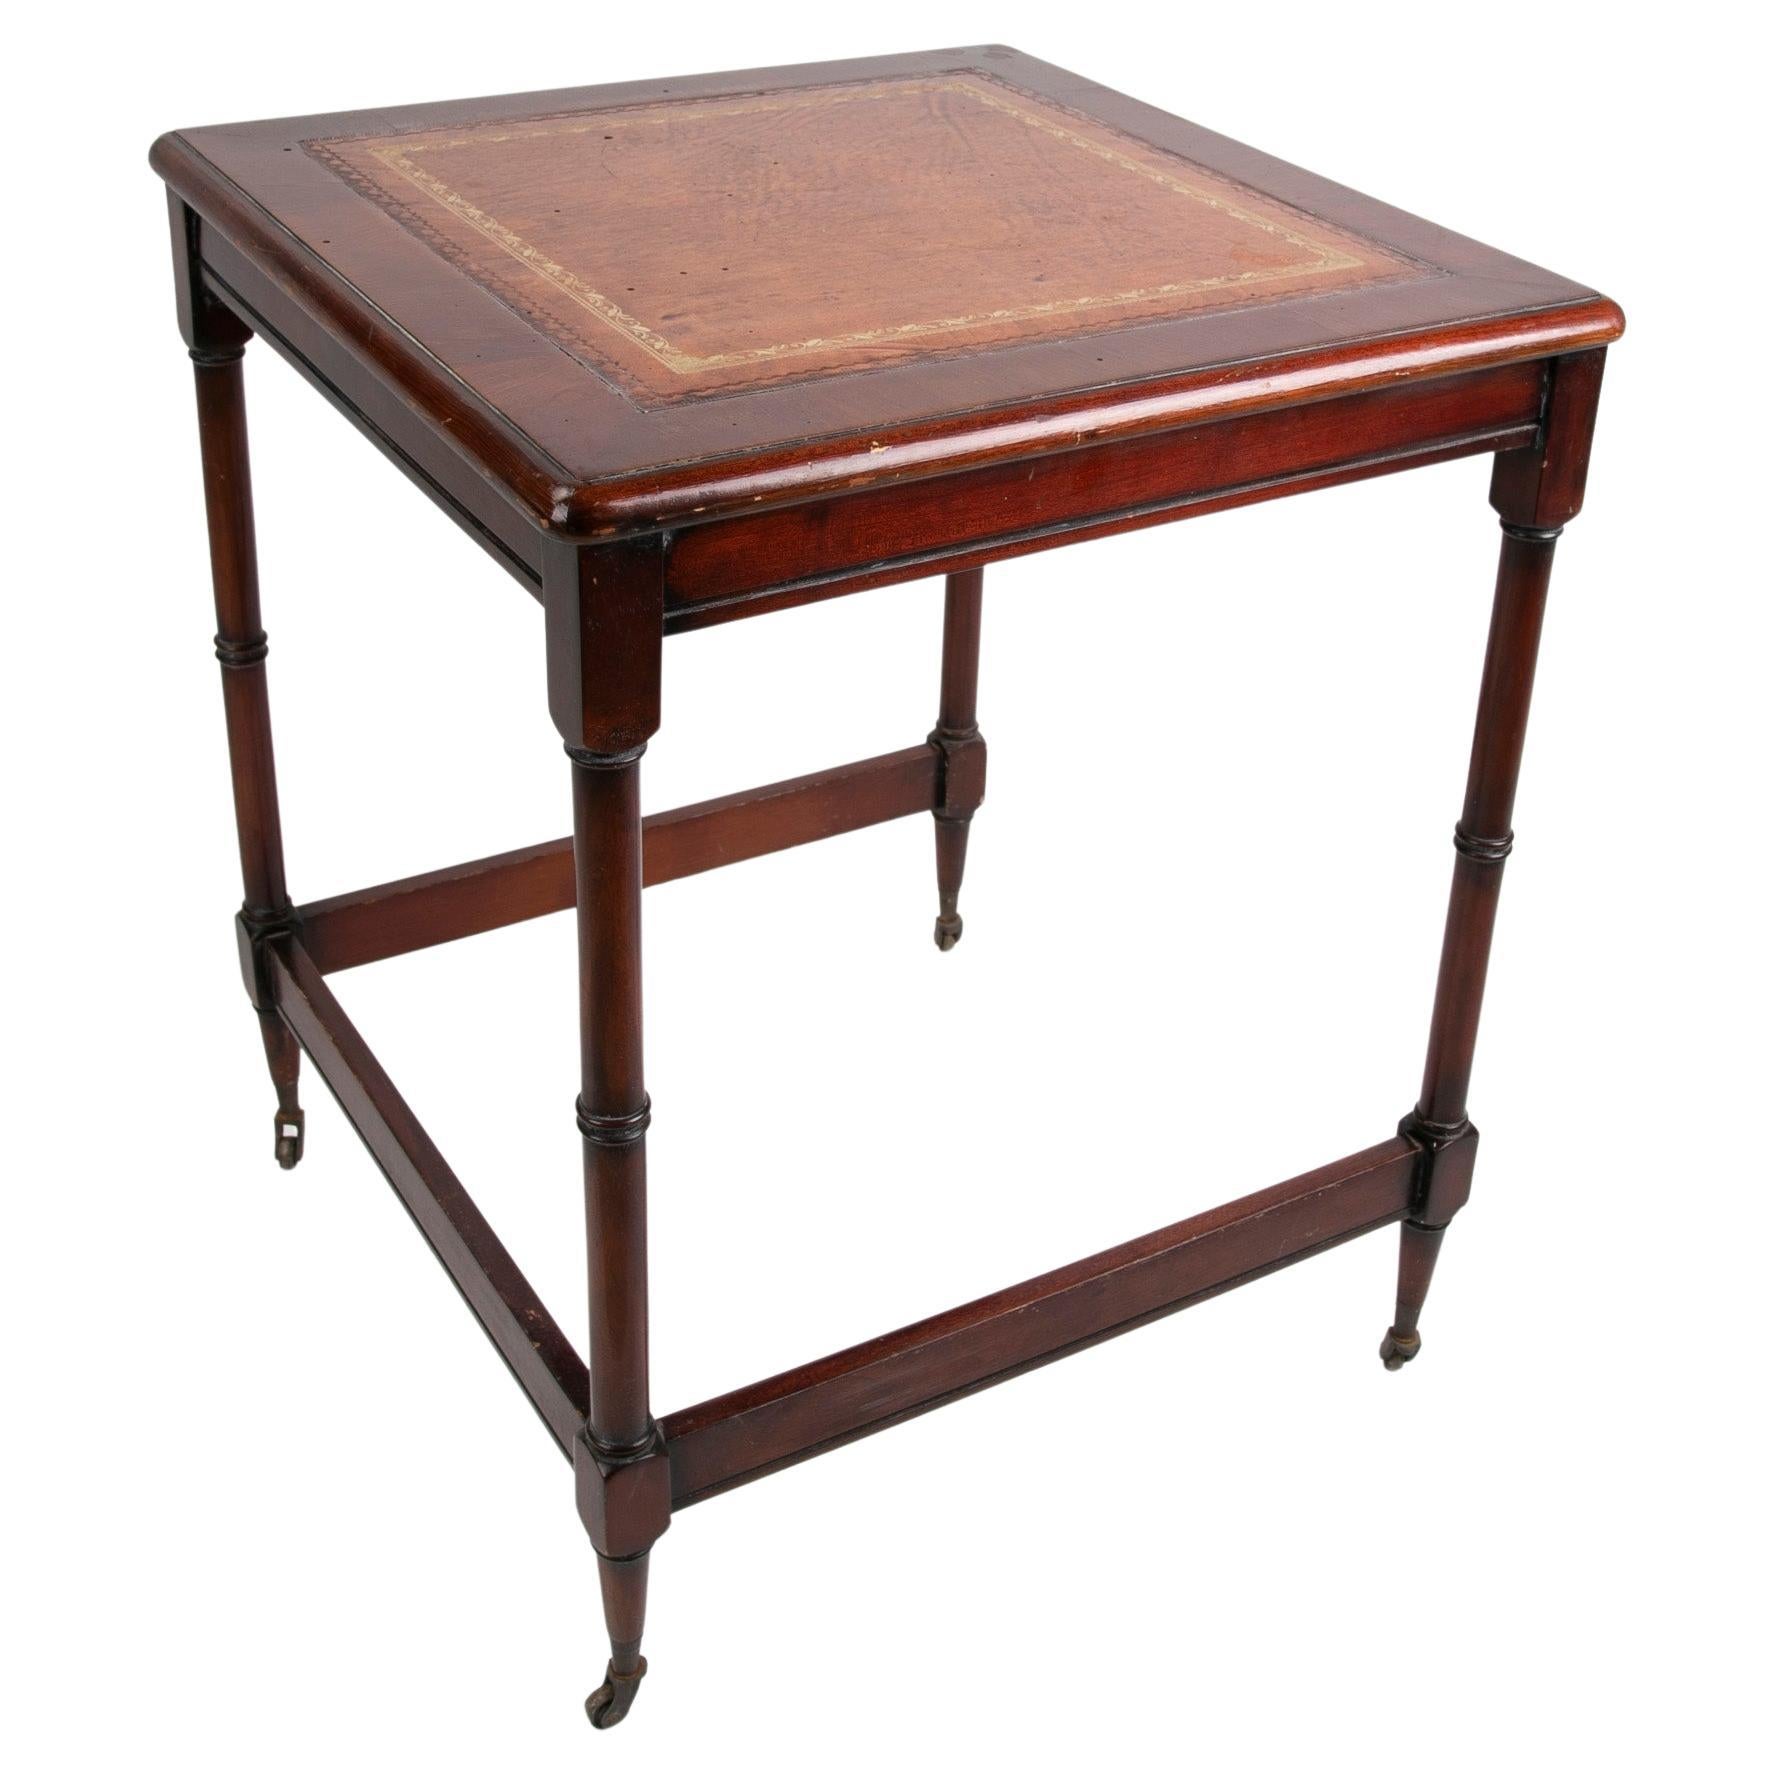 19th Century, English Mahogany Side Table with Castors with Mahogany Table Top For Sale